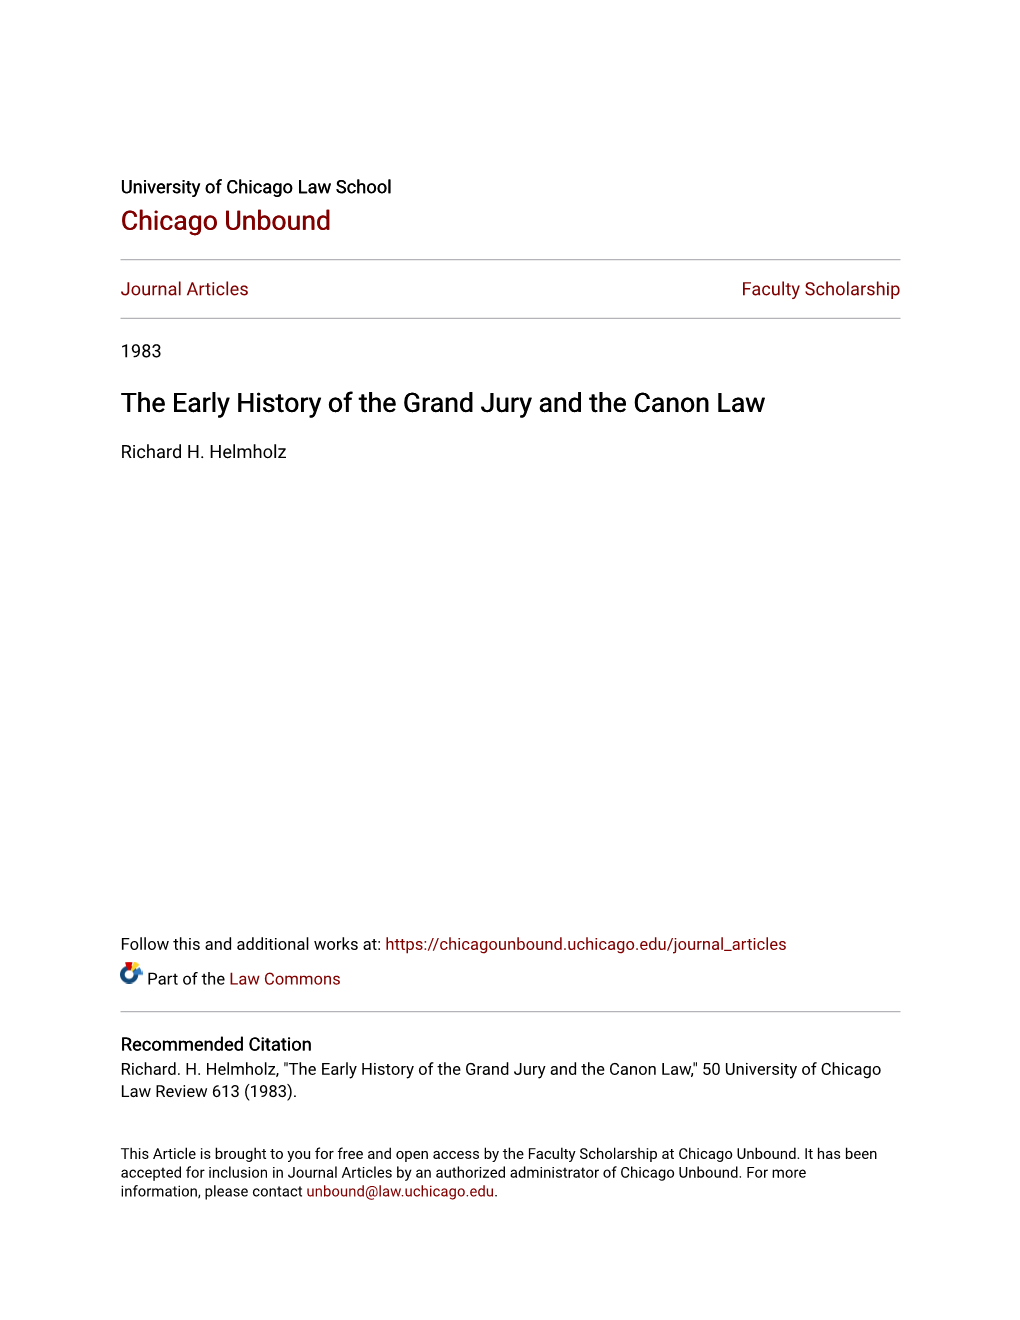 The Early History of the Grand Jury and the Canon Law